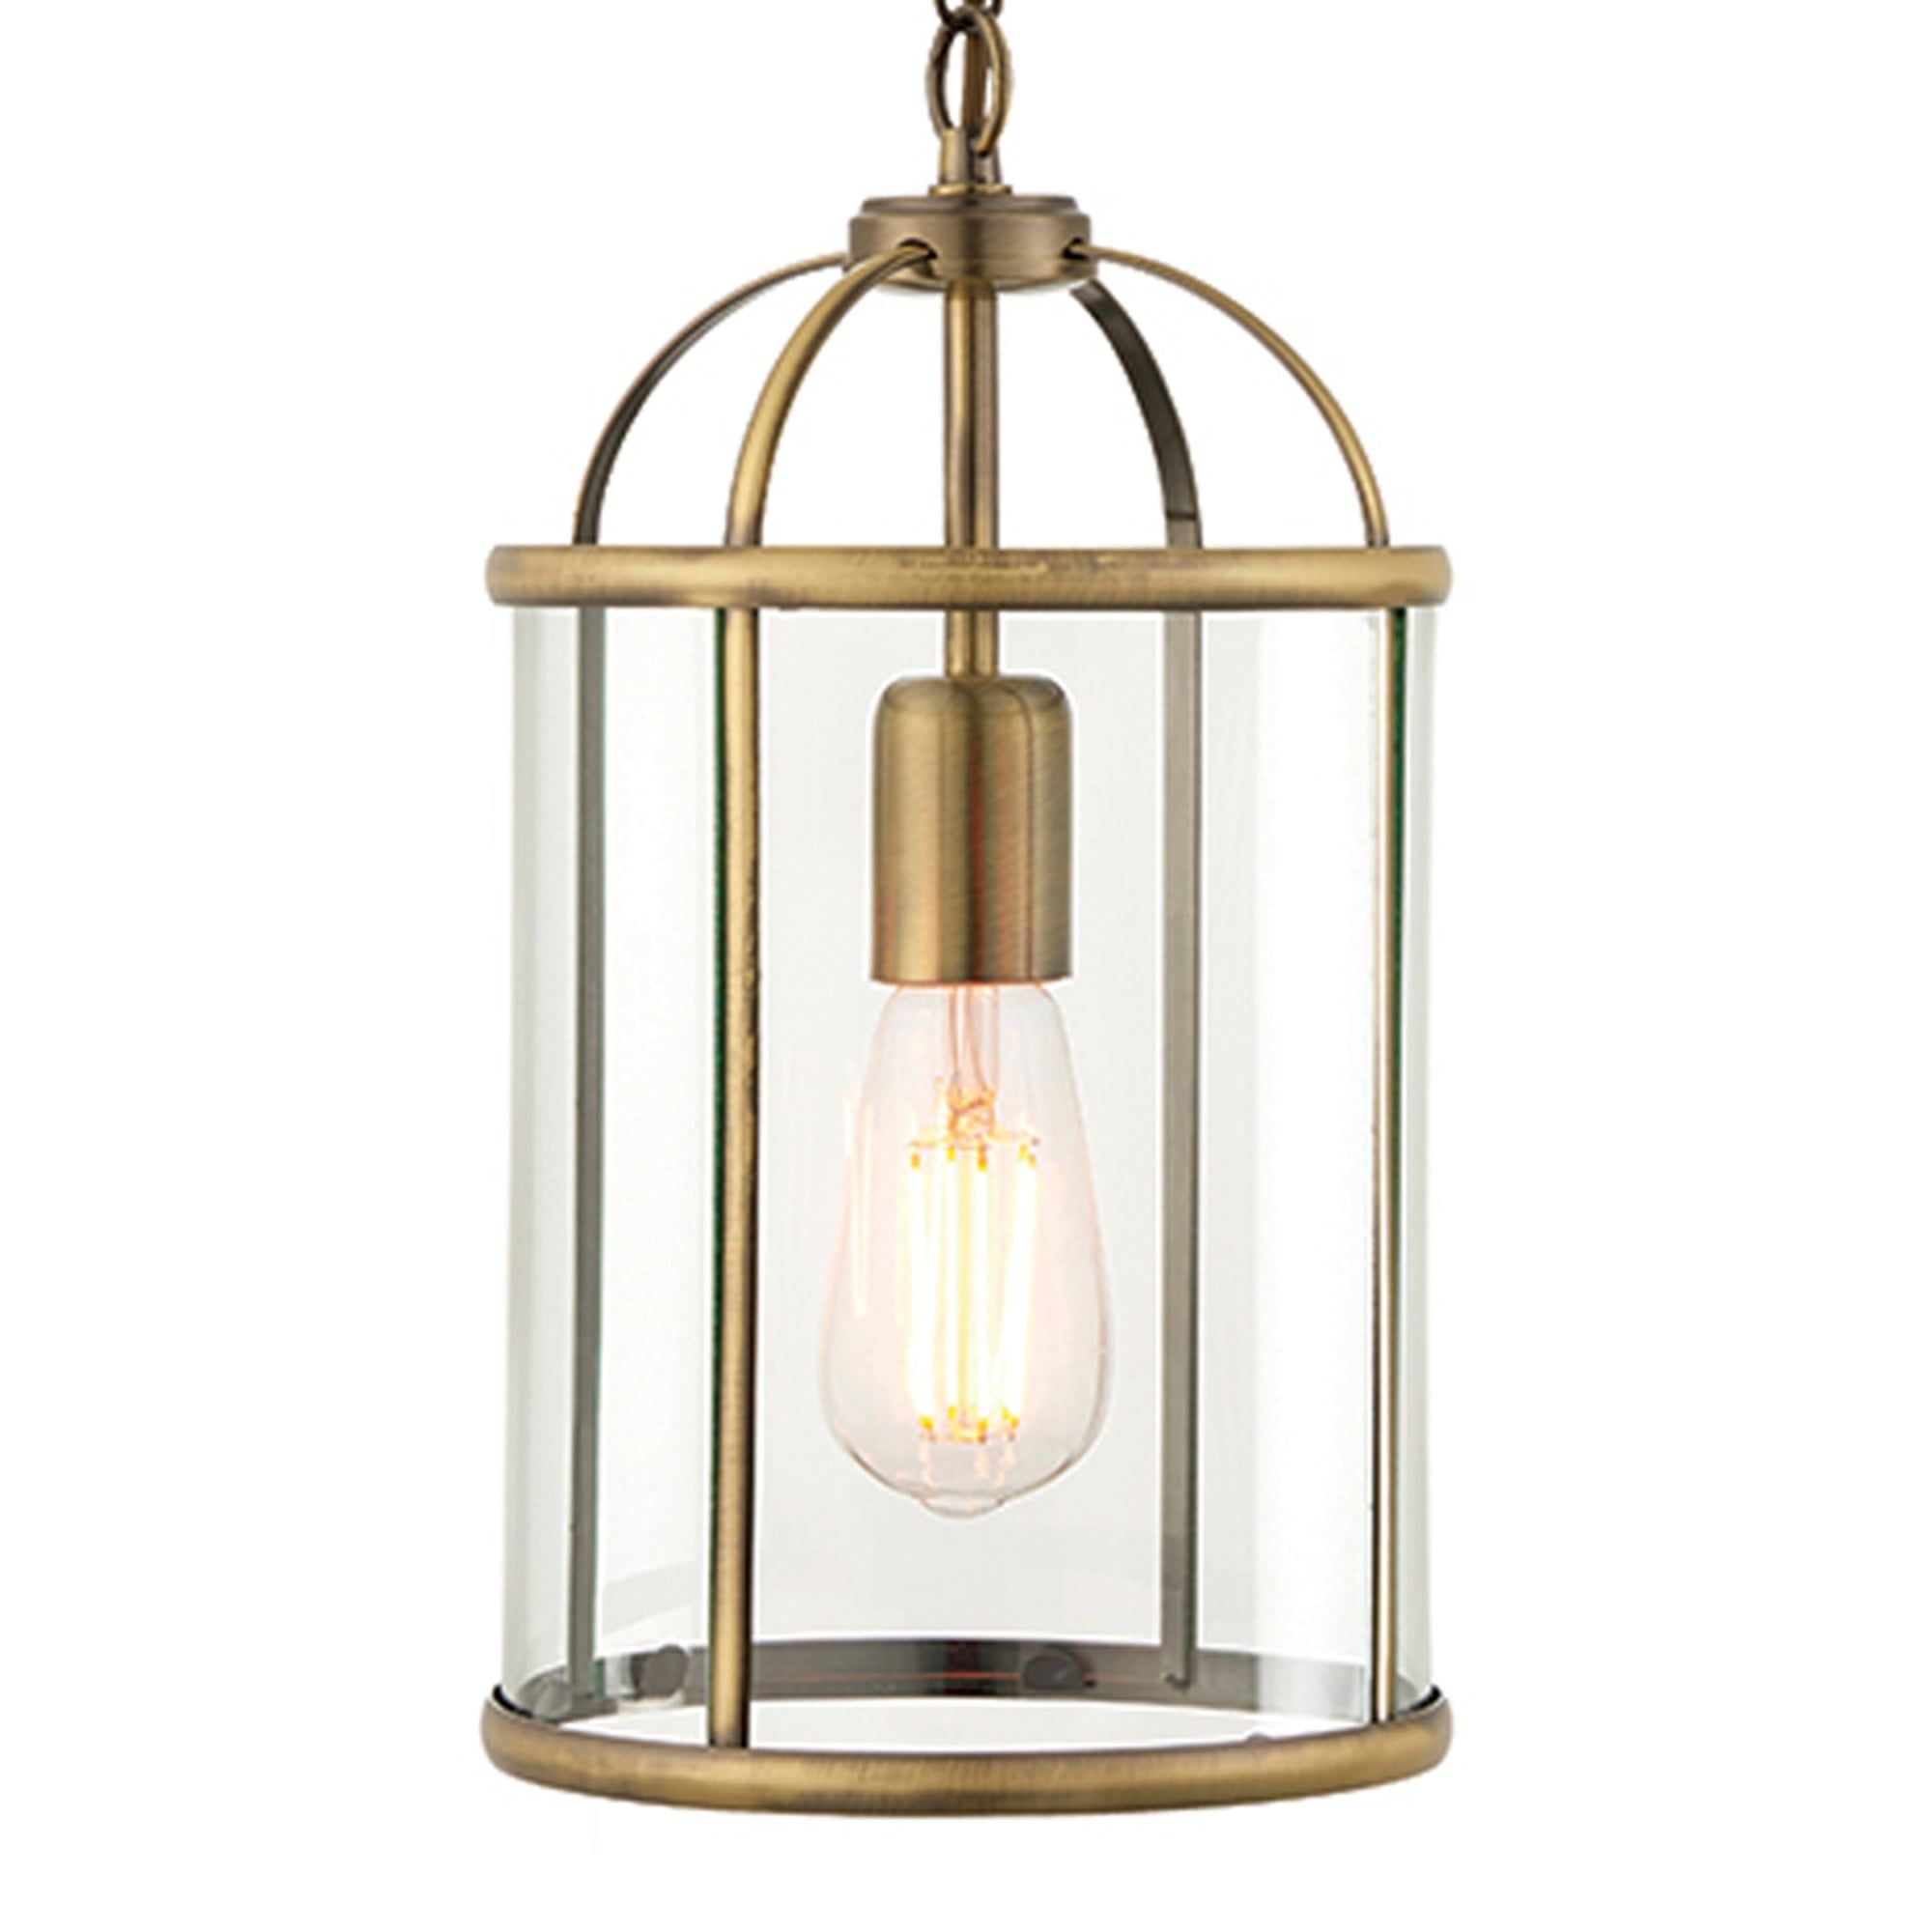 Newest Endon 69454 Lambeth 1 Light Antique Brass And Glass Lantern Pendant With Aged Brass Lantern Chandeliers (View 7 of 10)